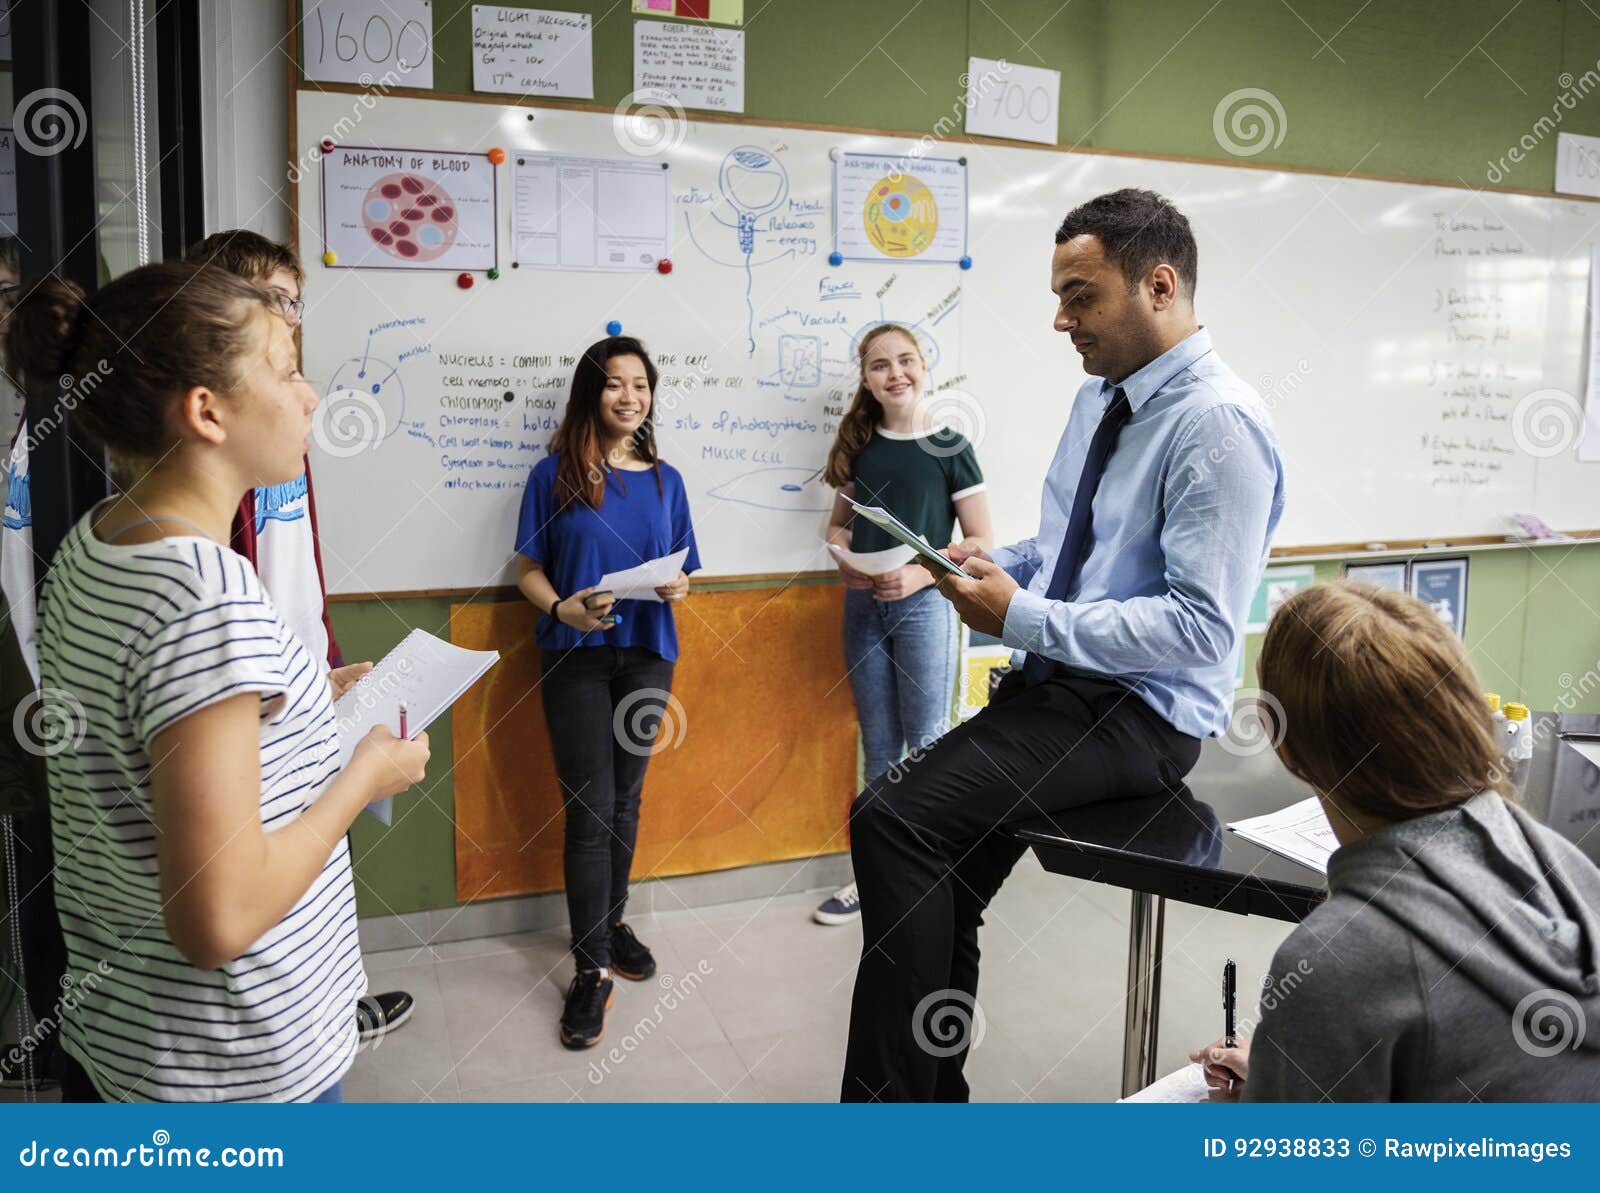 group presentation in the classroom